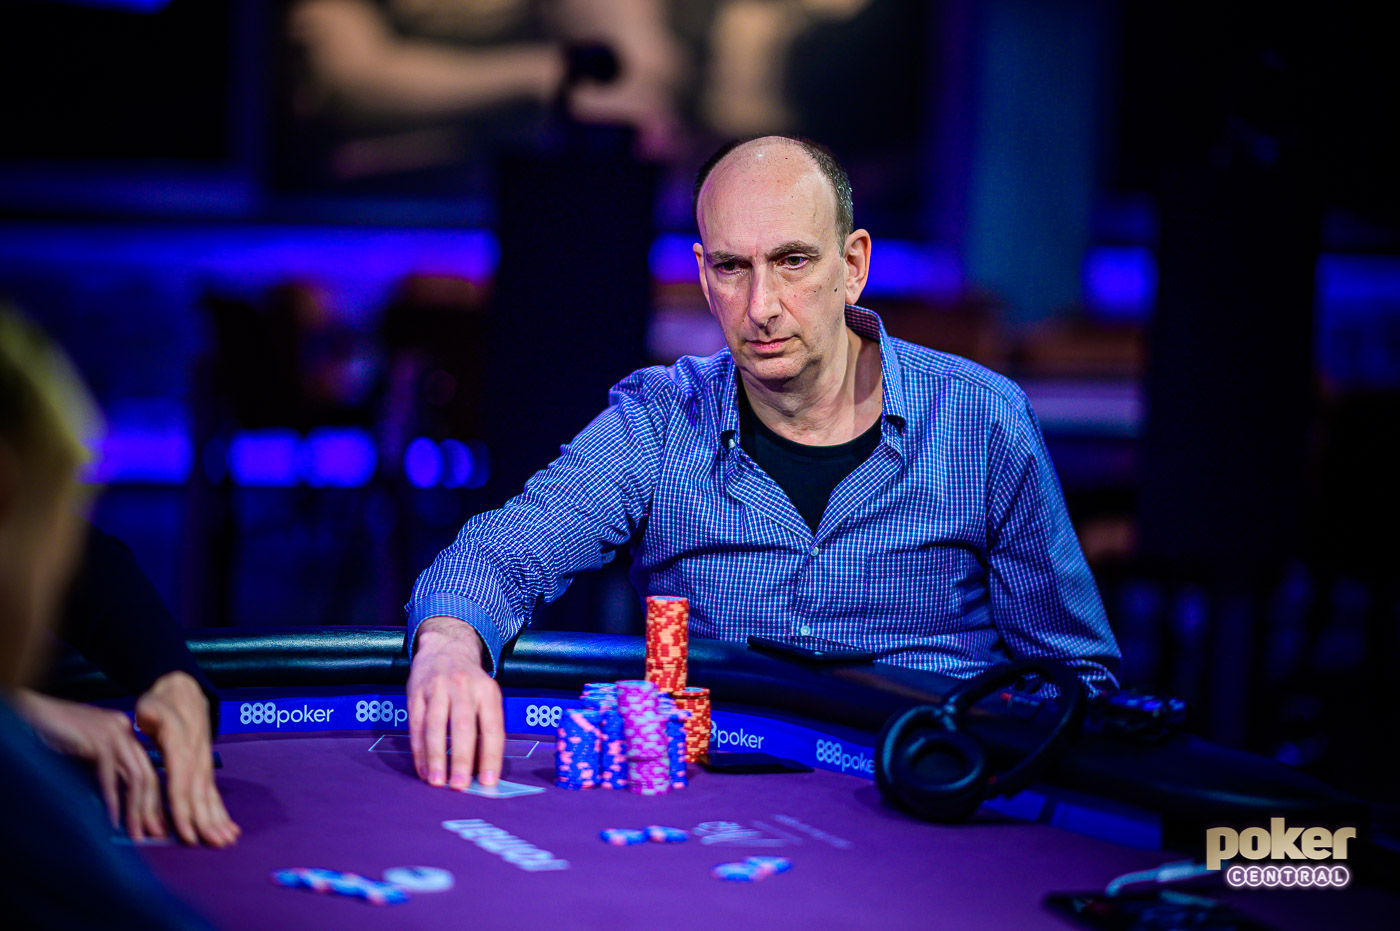 Erik Seidel made it to three-handed play before getting eliminated by Alex Foxen.